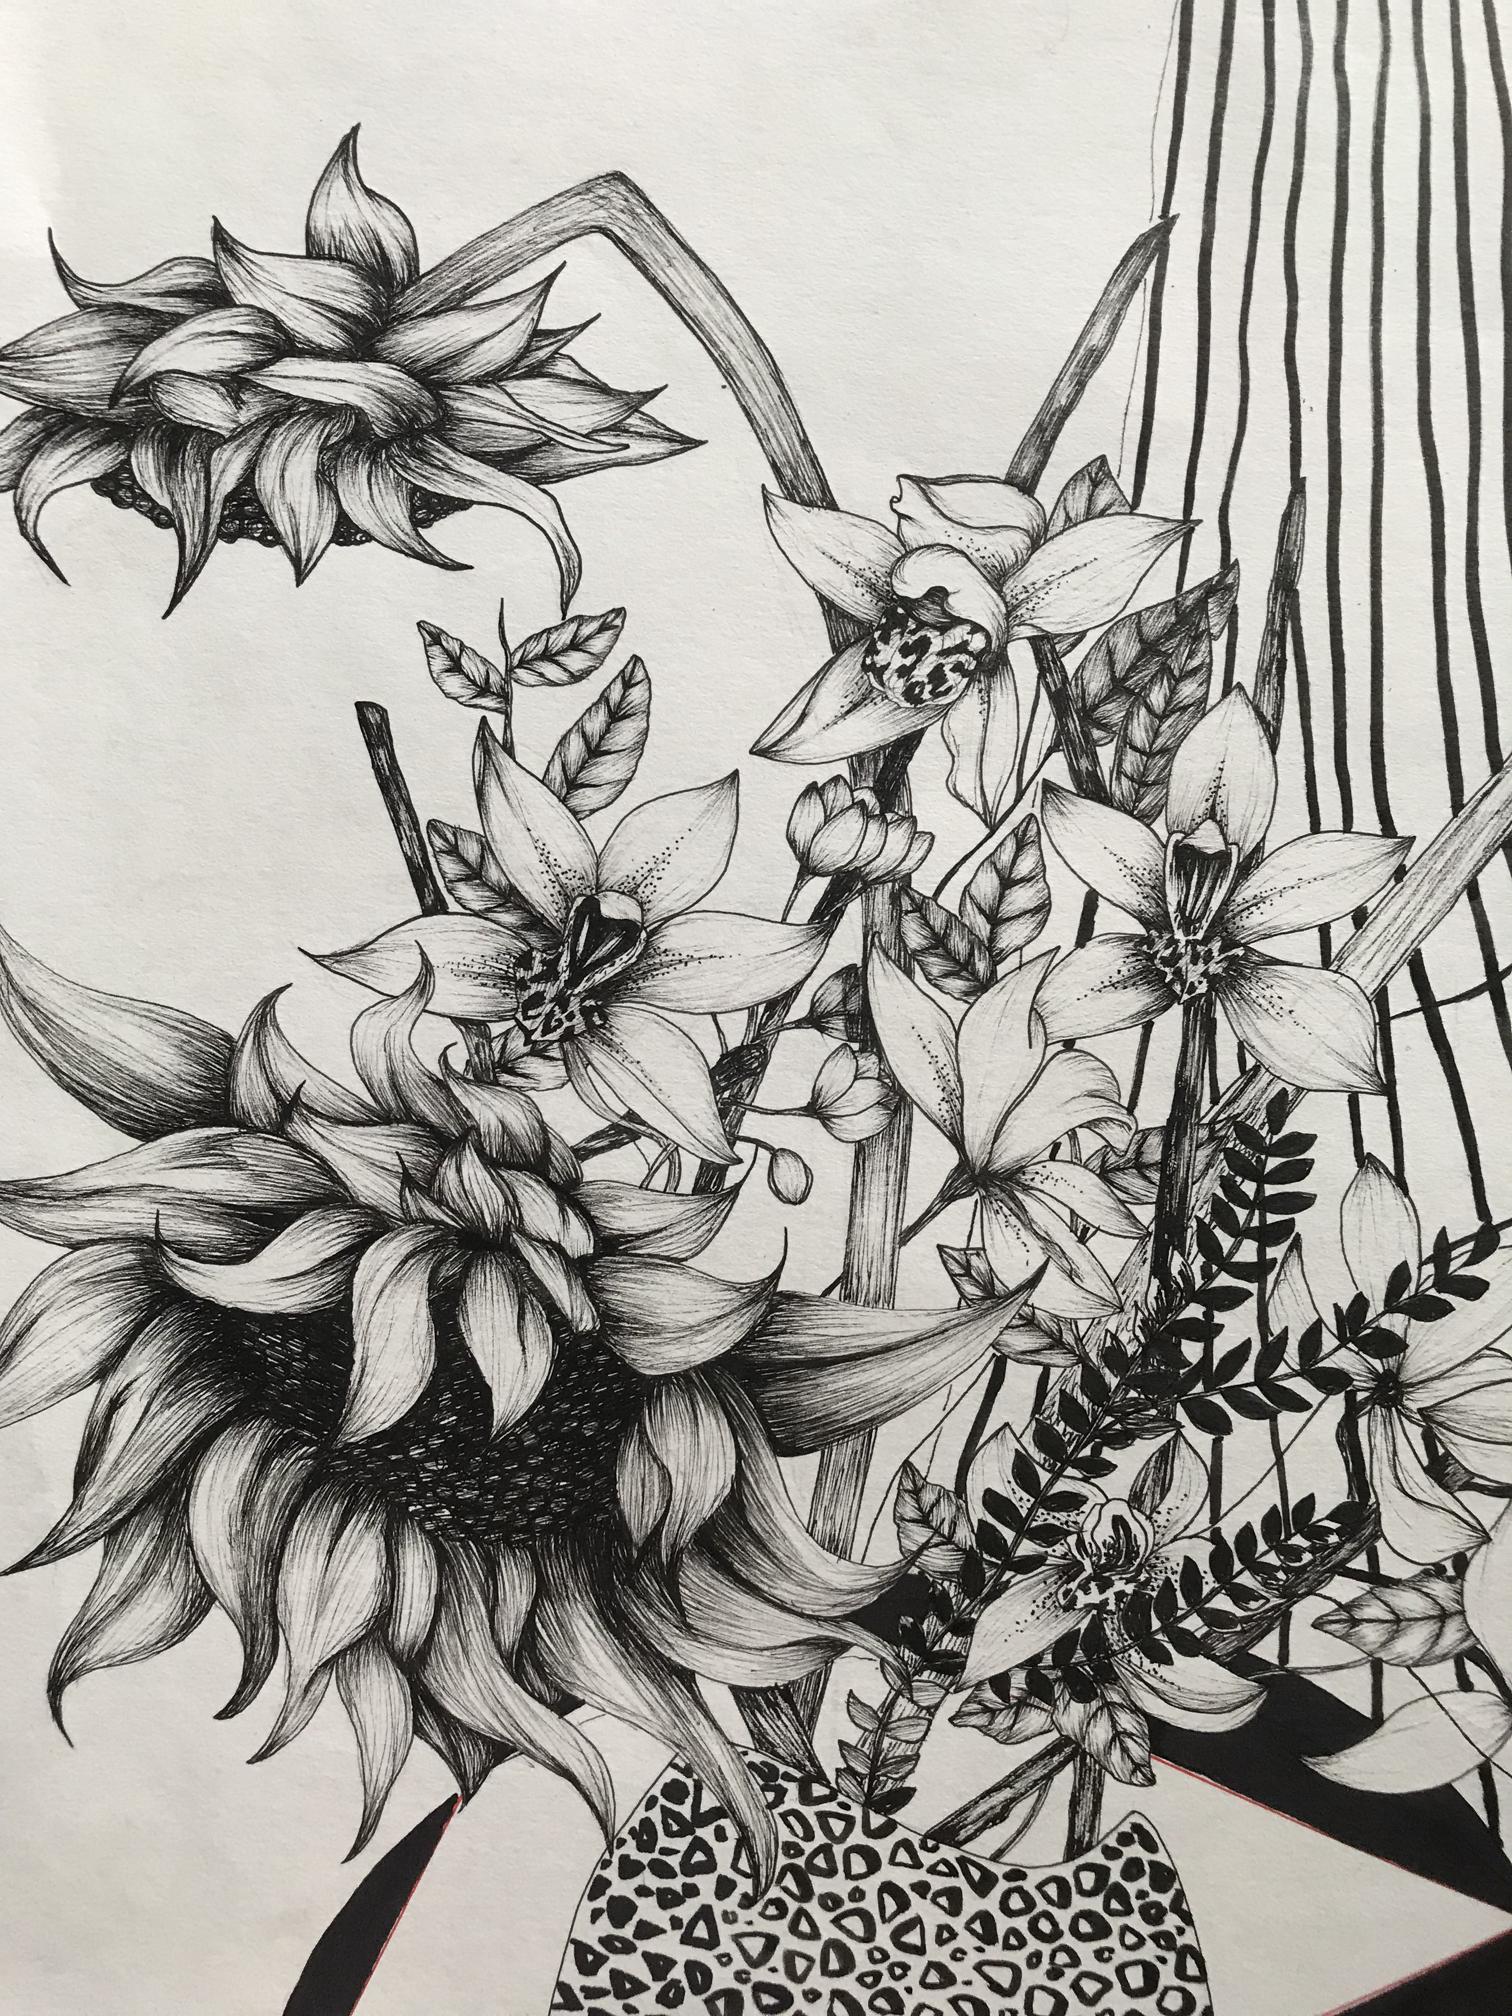 Within the abstract pen painting, sunflowers and lilies are featured by an unknown creator